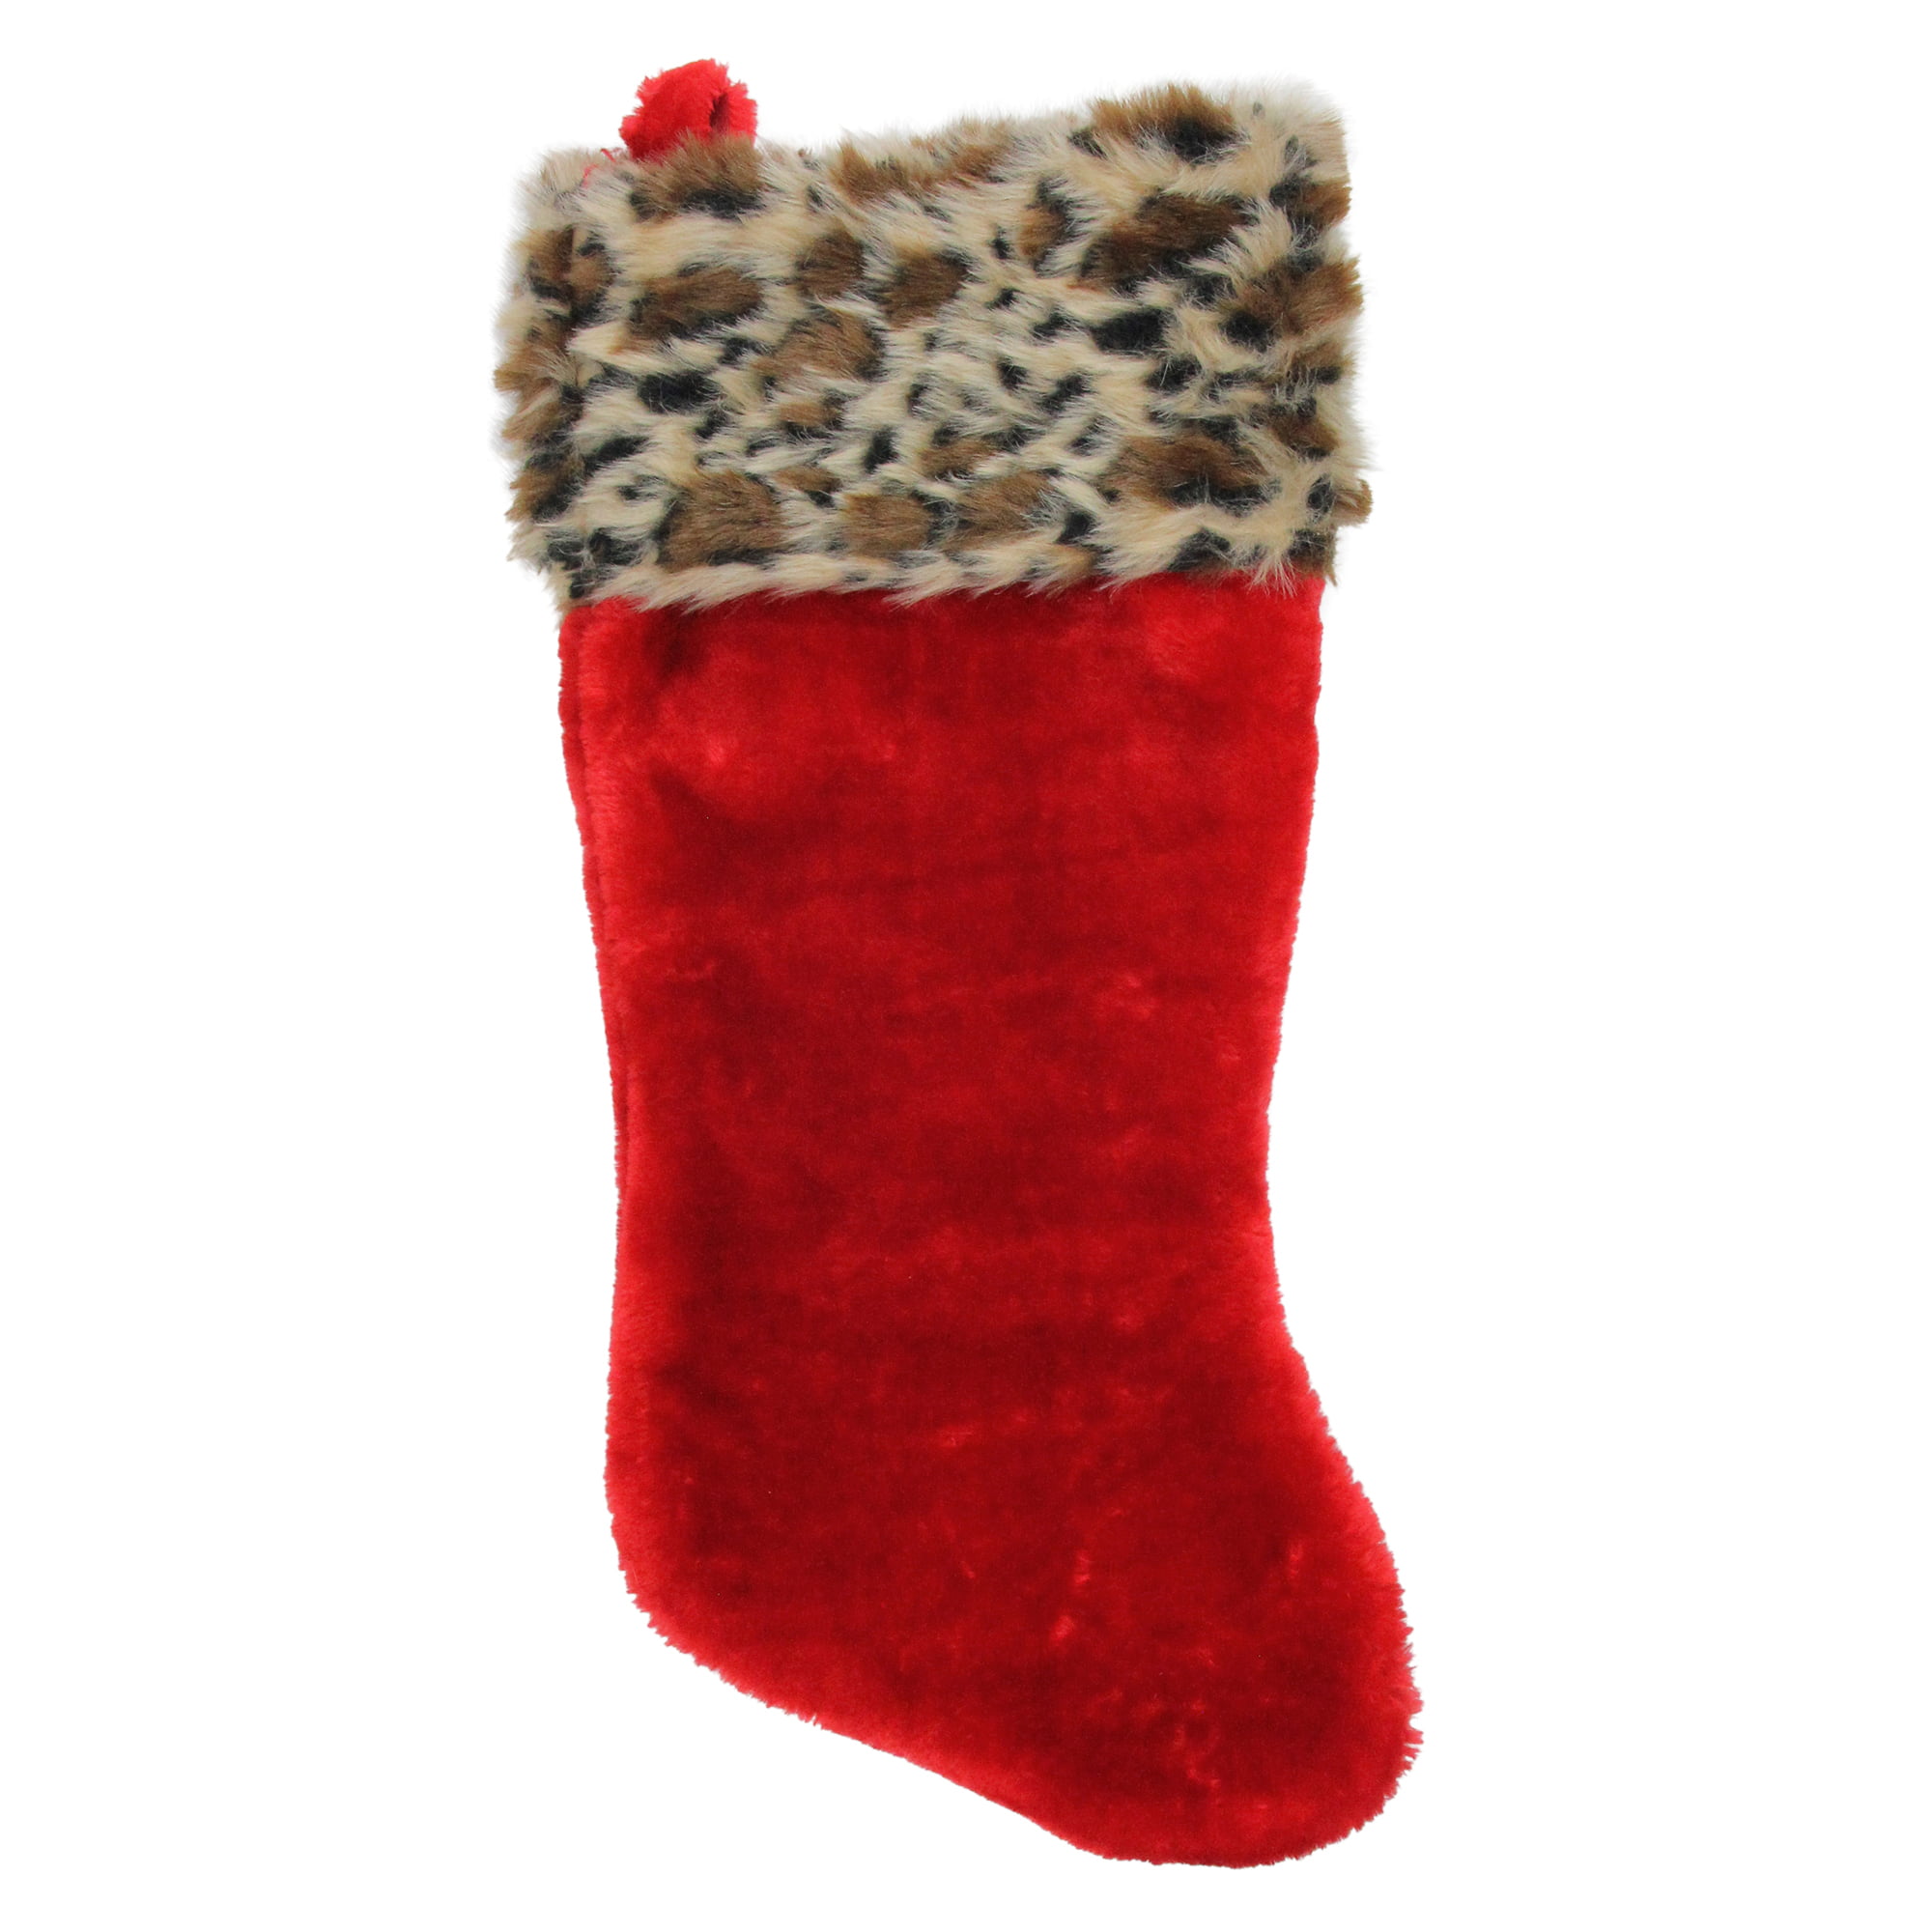 SOFT 18 INCH STOCKING WITH RED & LEOPARD ANIMAL PRINT TOP CHRISTMAS HOLIDAY NEW 